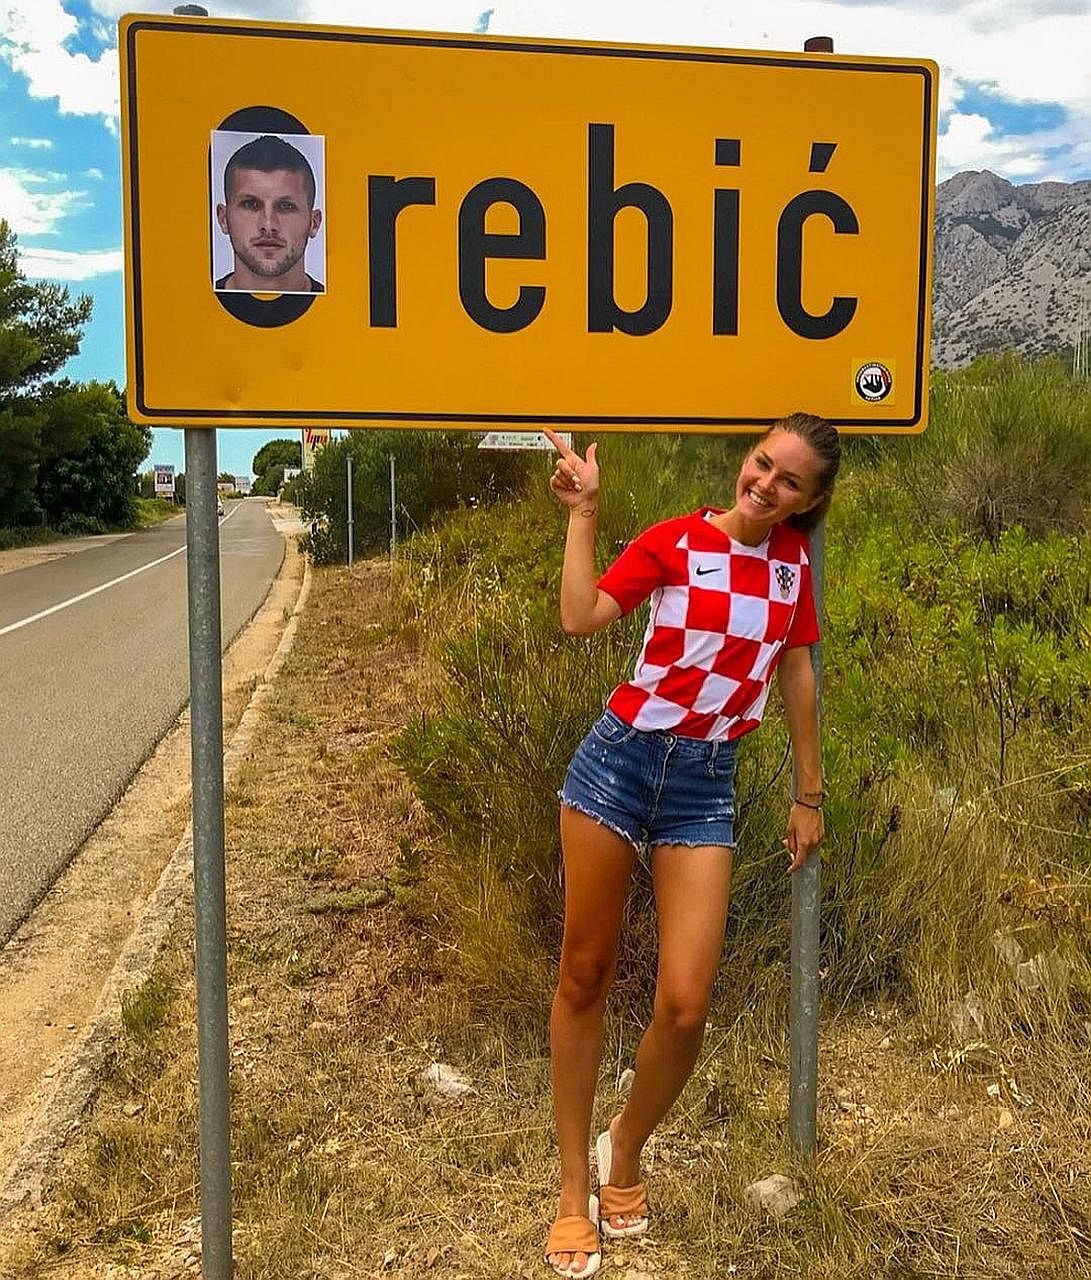 HOT SHOT #1 A fan pointing out that the Croatian town of Orebic has been renamed (Ante) Rebic after the Croatia winger. He is expected to line up against England today in their semi-final as Croatia aim to go one better than the Class of '98. CAUGHT 